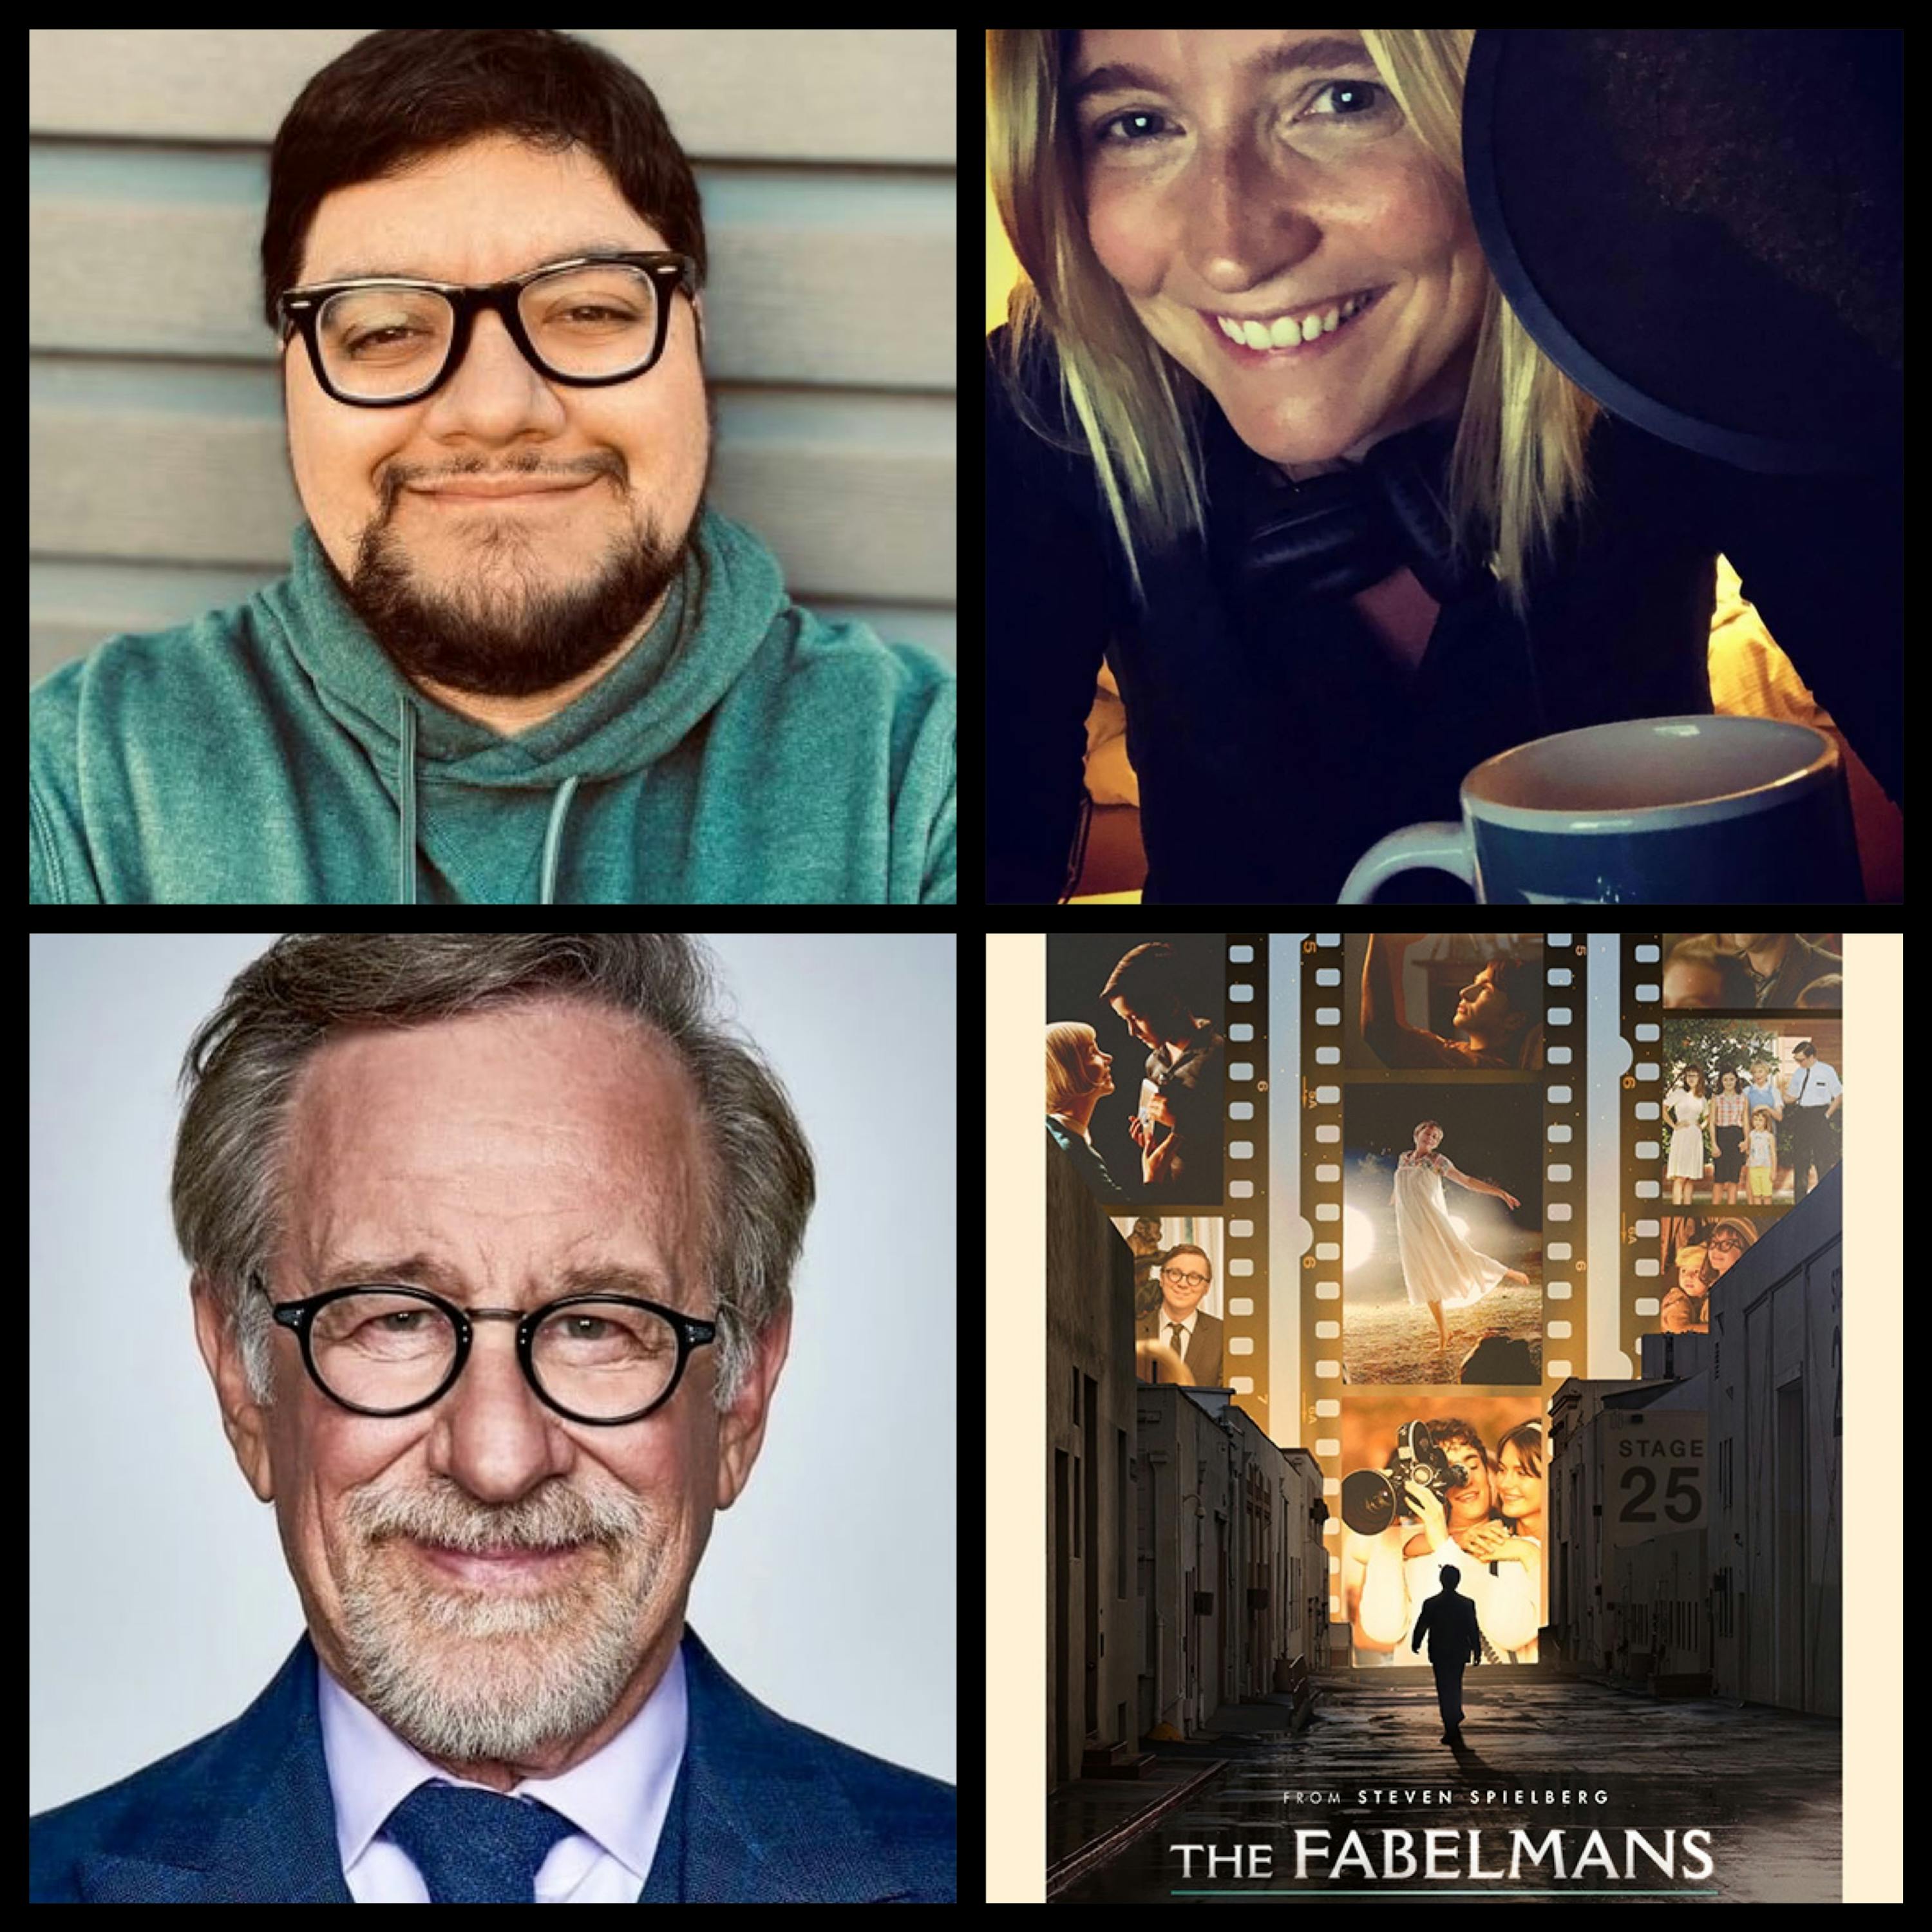 304: A deep dive into Steven Spielberg's most personal films & stories ahead of 'The Fabelmans'. With Ryan McQuade (AwardsWatch, InSession Film)